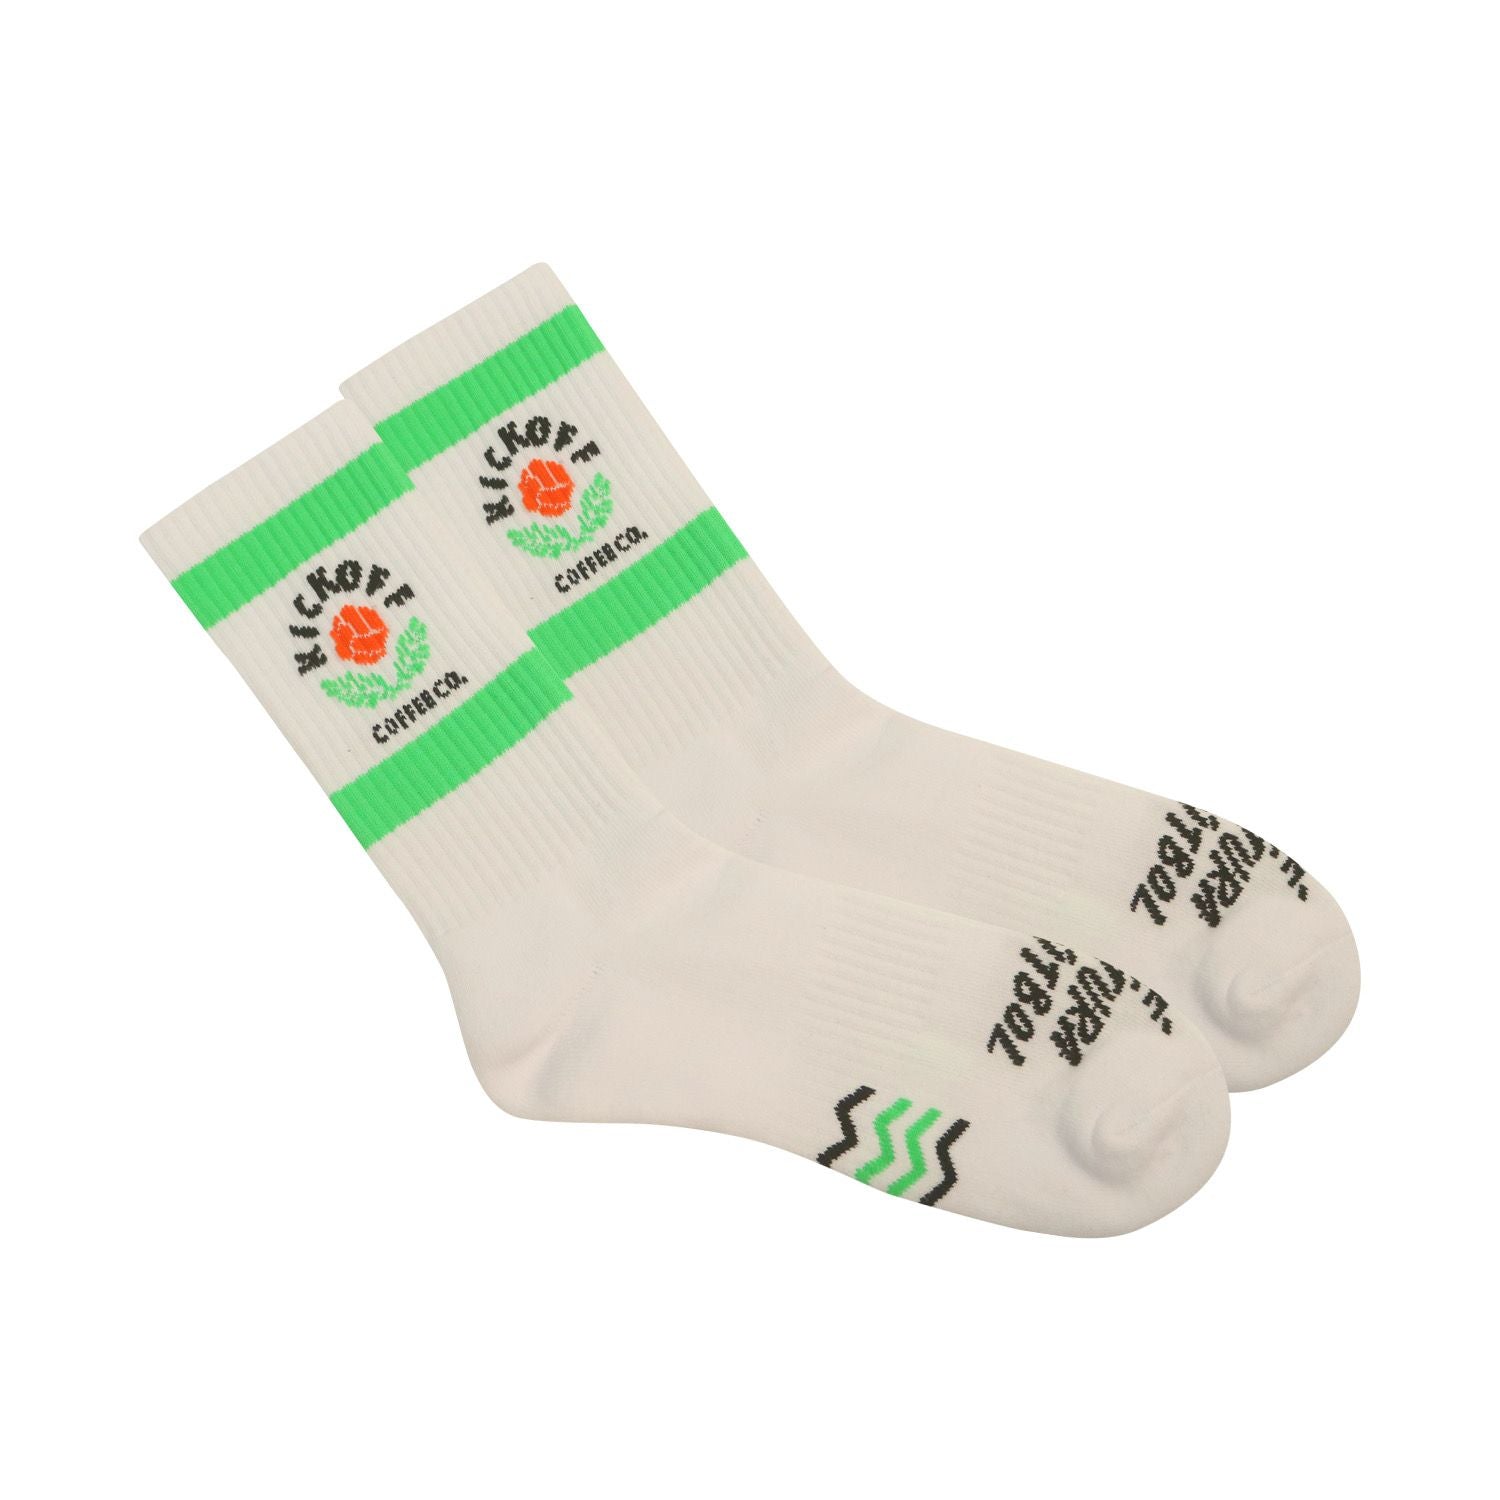 white pair of vintage-style crew socks with green hoops and kickoff coffee co. logo. 